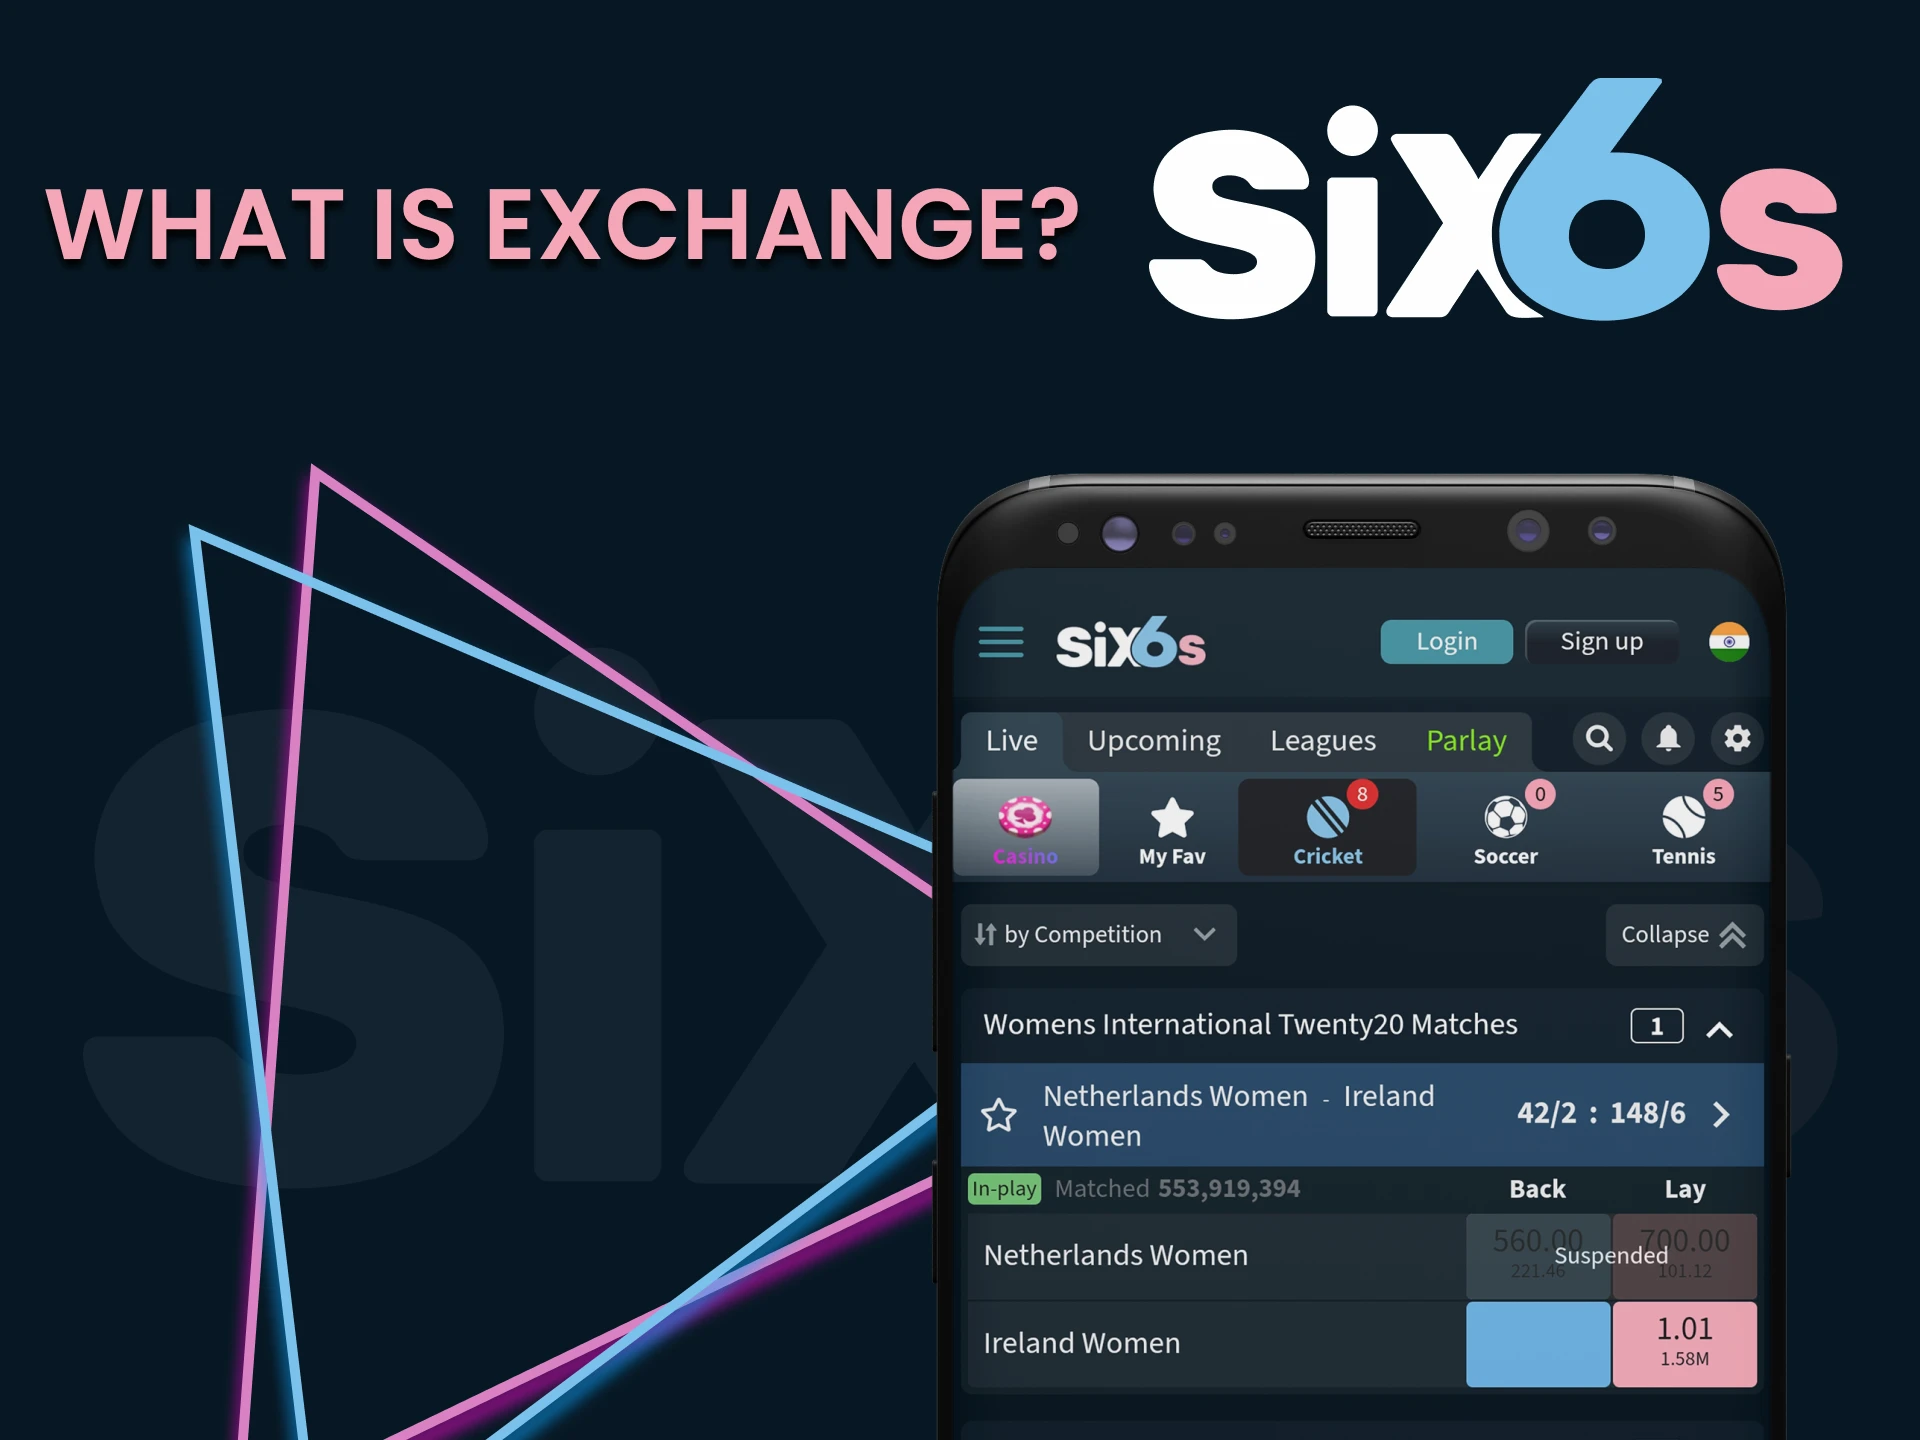 We will tell you about the exchange on six6s.